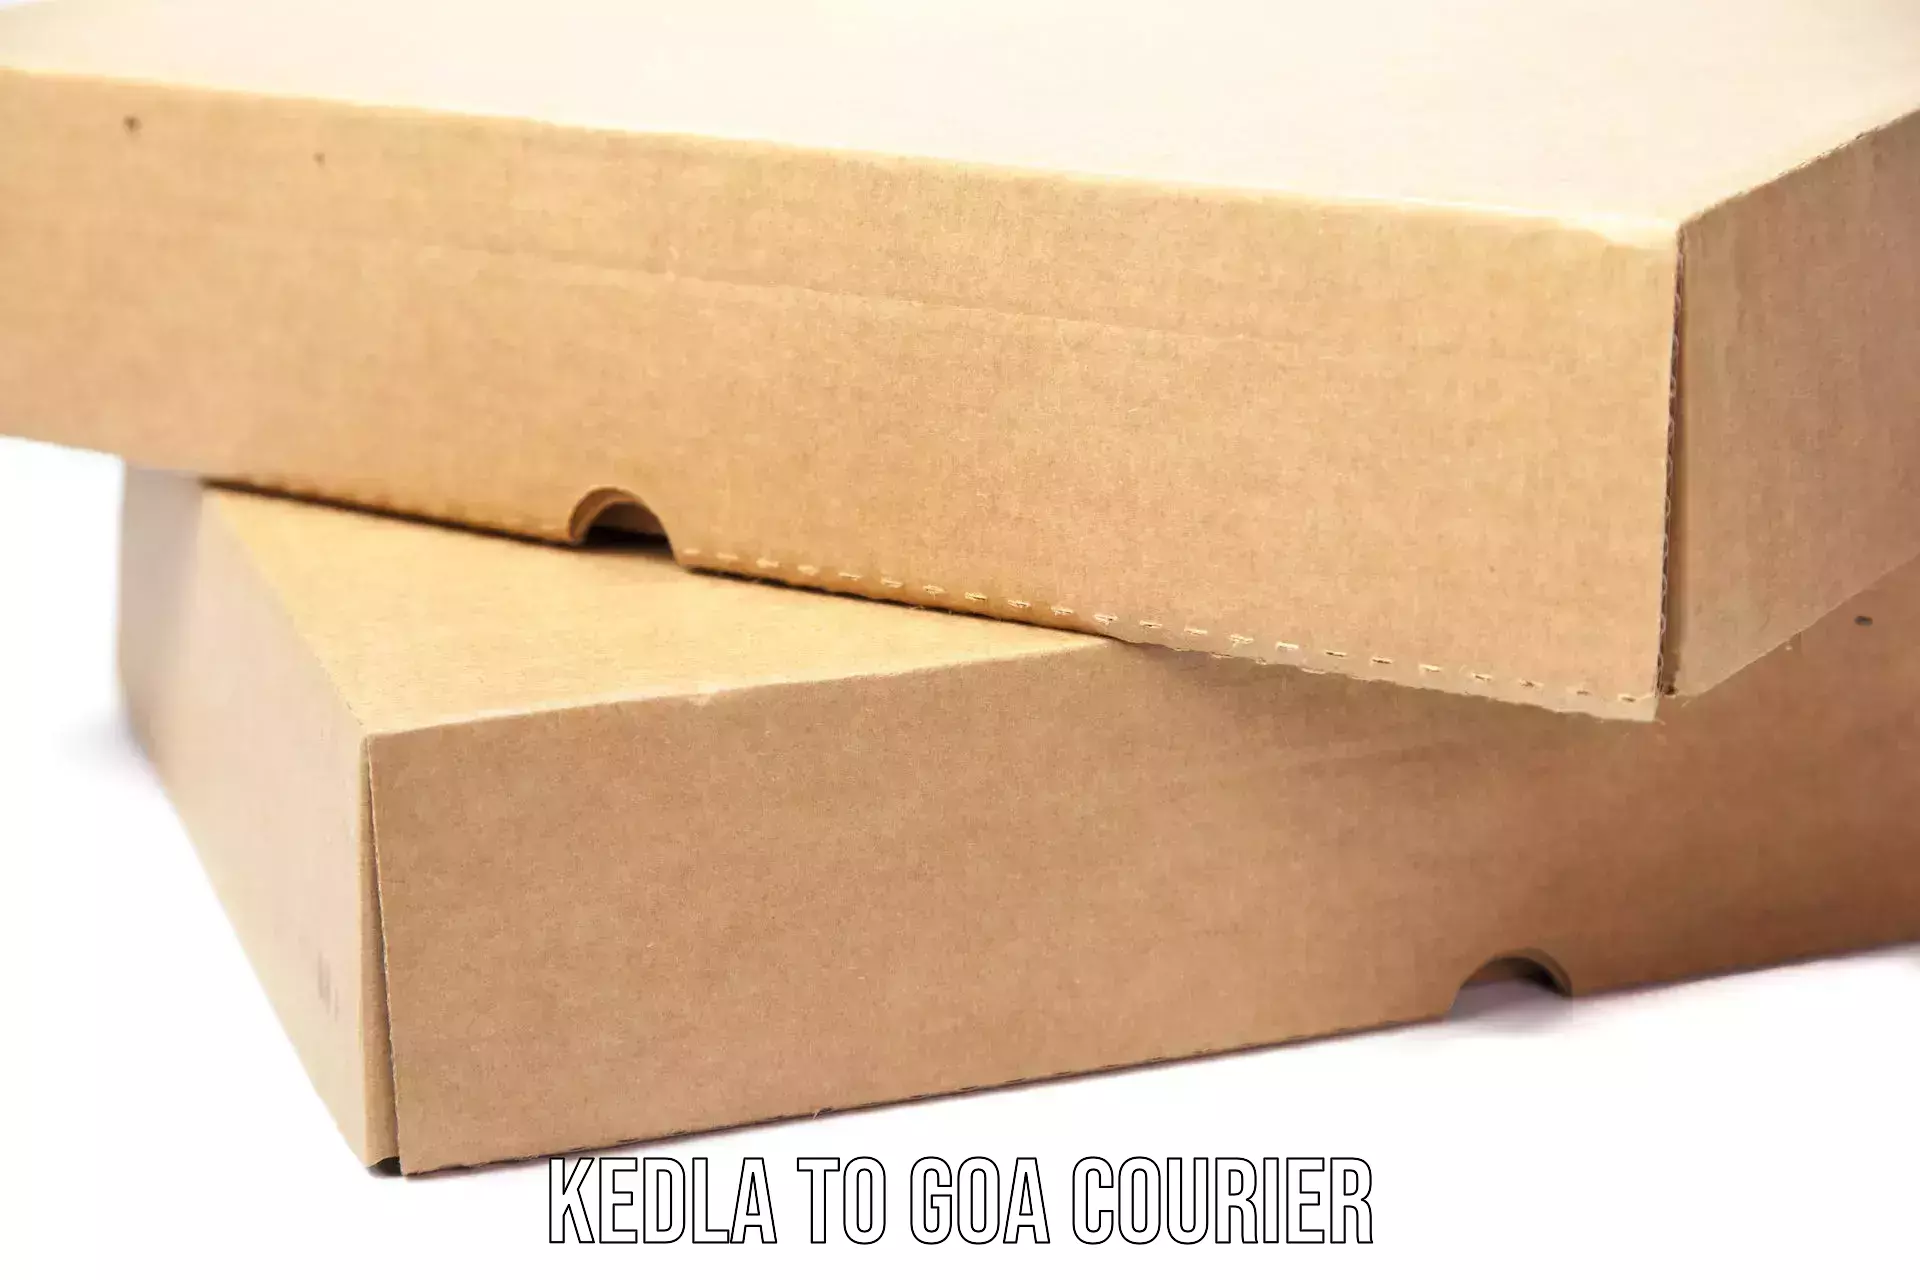 Reliable courier service Kedla to Goa